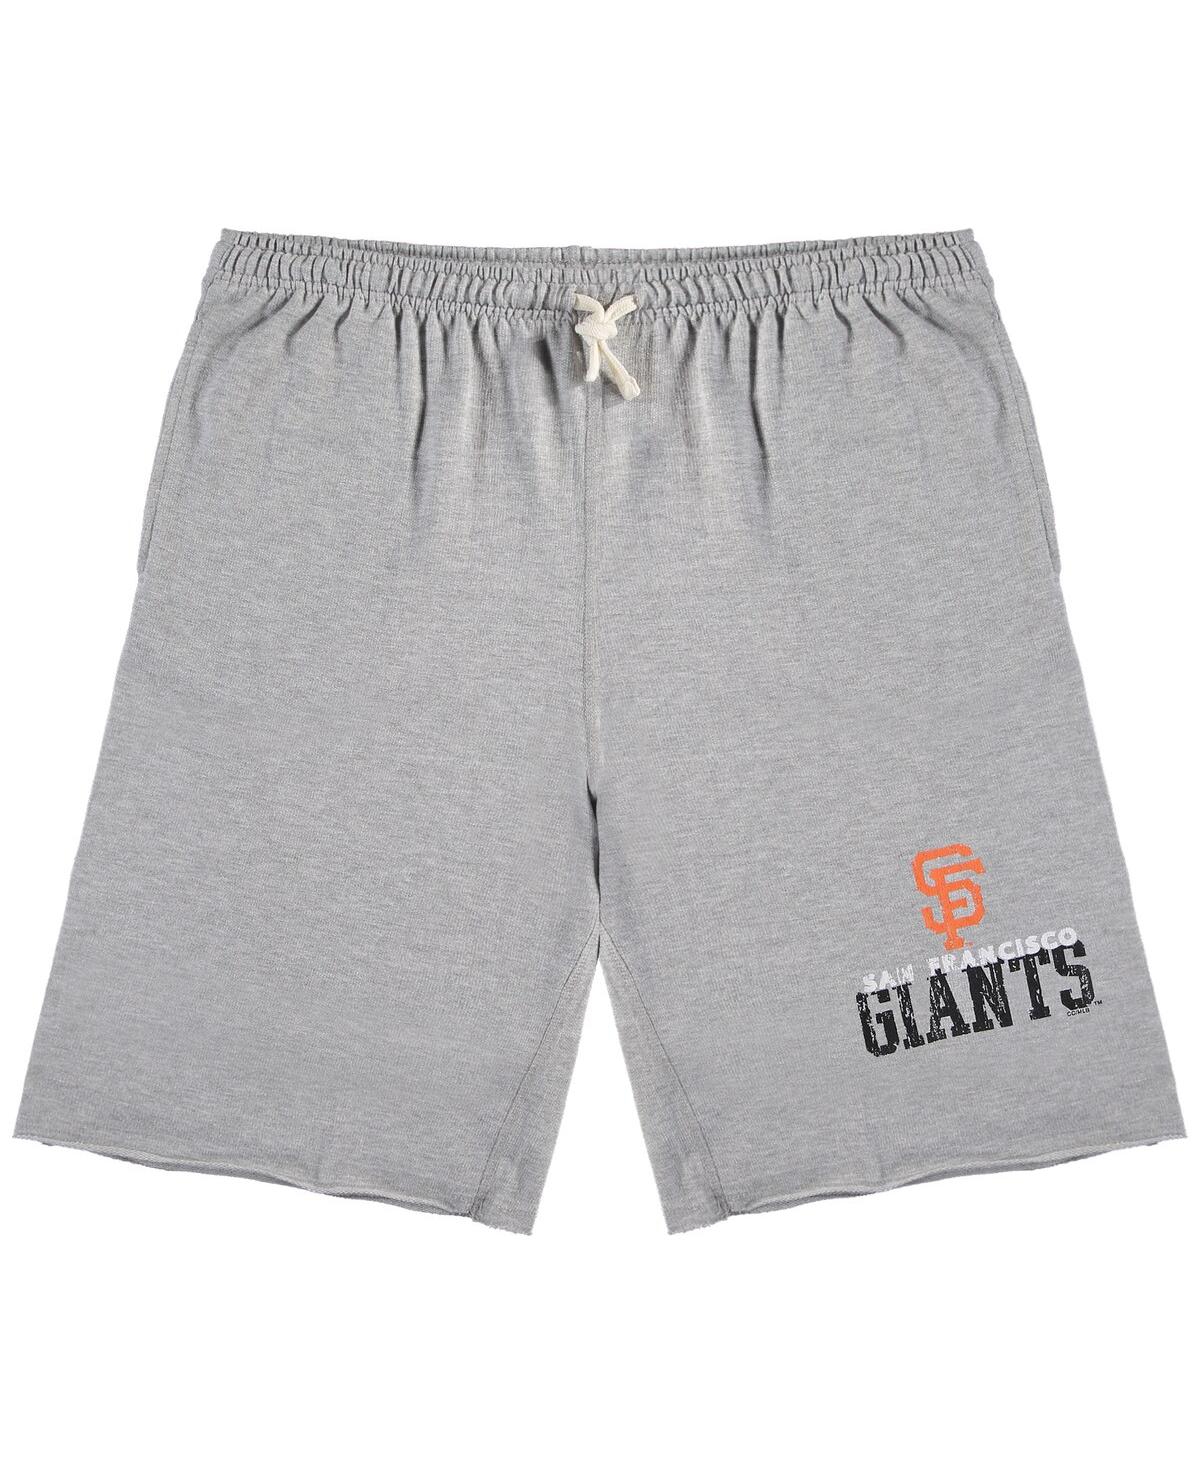 PROFILE MEN'S HEATHERED GRAY DISTRESSED SAN FRANCISCO GIANTS BIG AND TALL FRENCH TERRY SHORTS